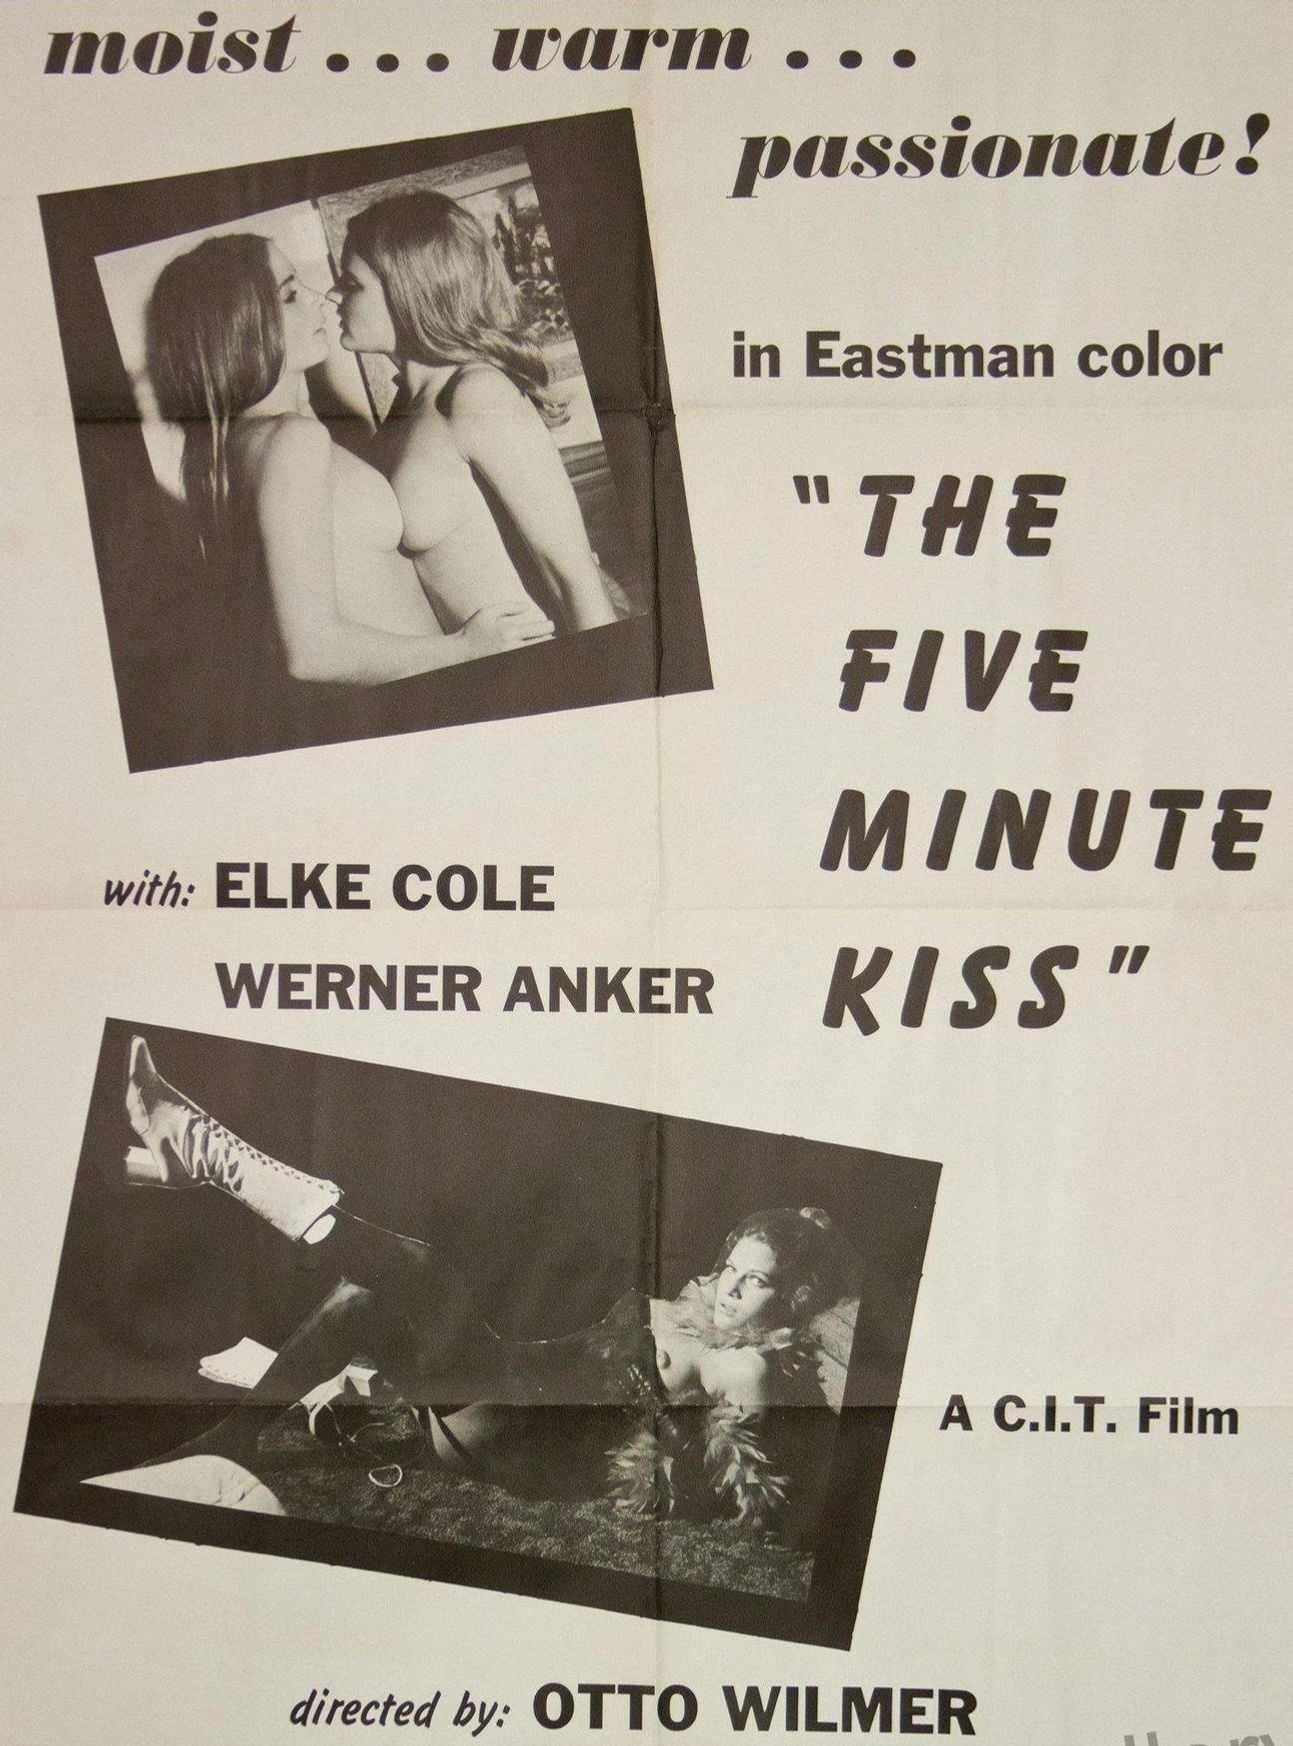 The Five Minute Kiss